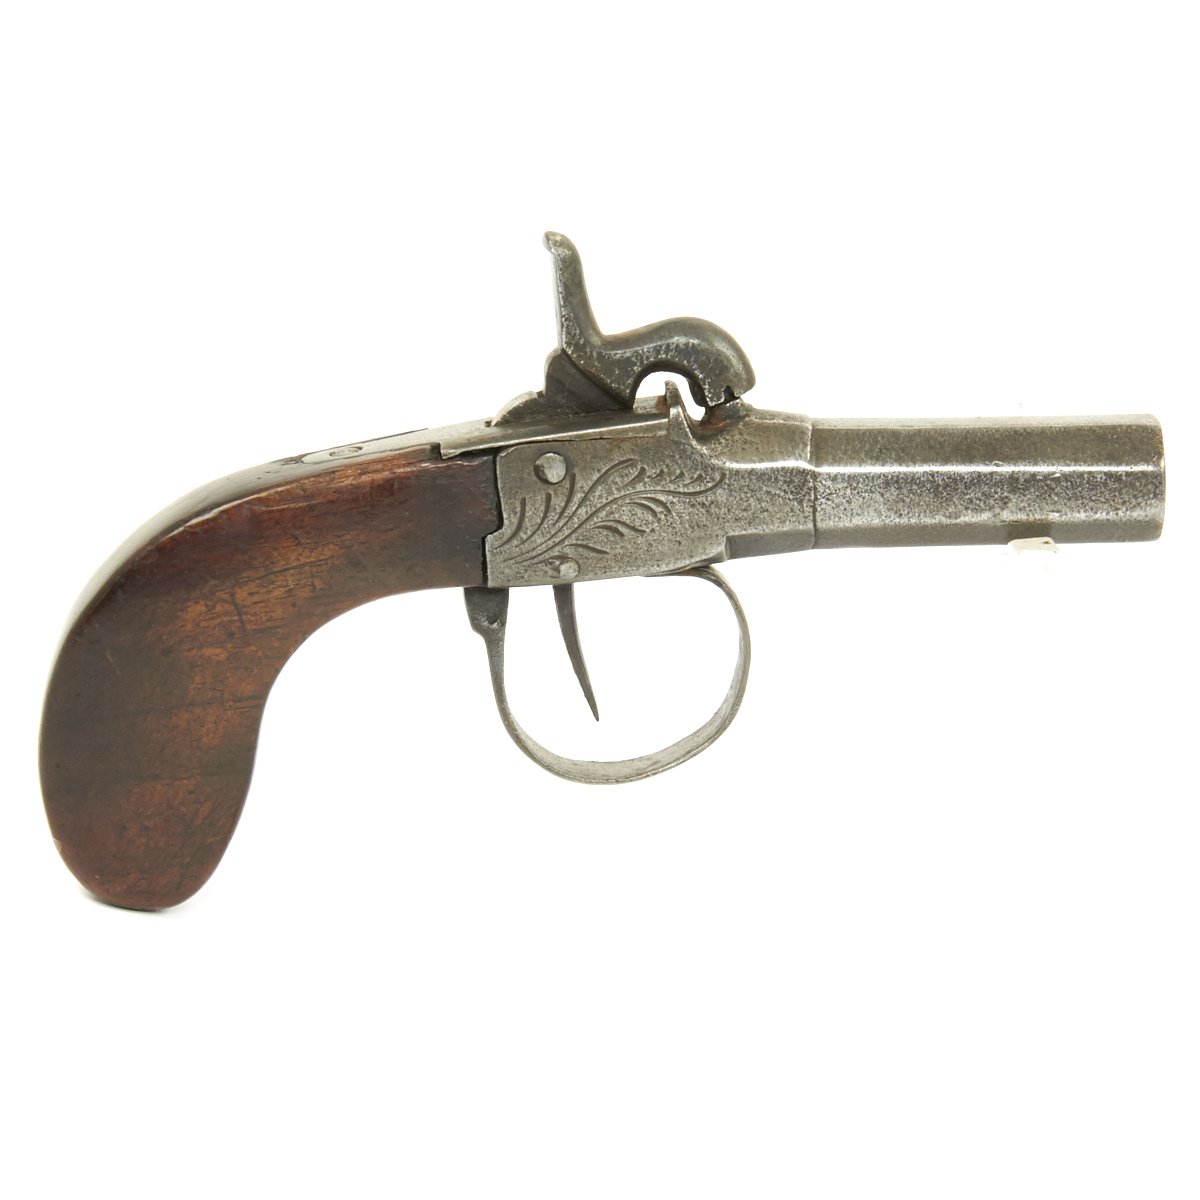 Belgian Percussion cap pocket pistol, brass action and cannon barrel with  Liege proof mark, trigger